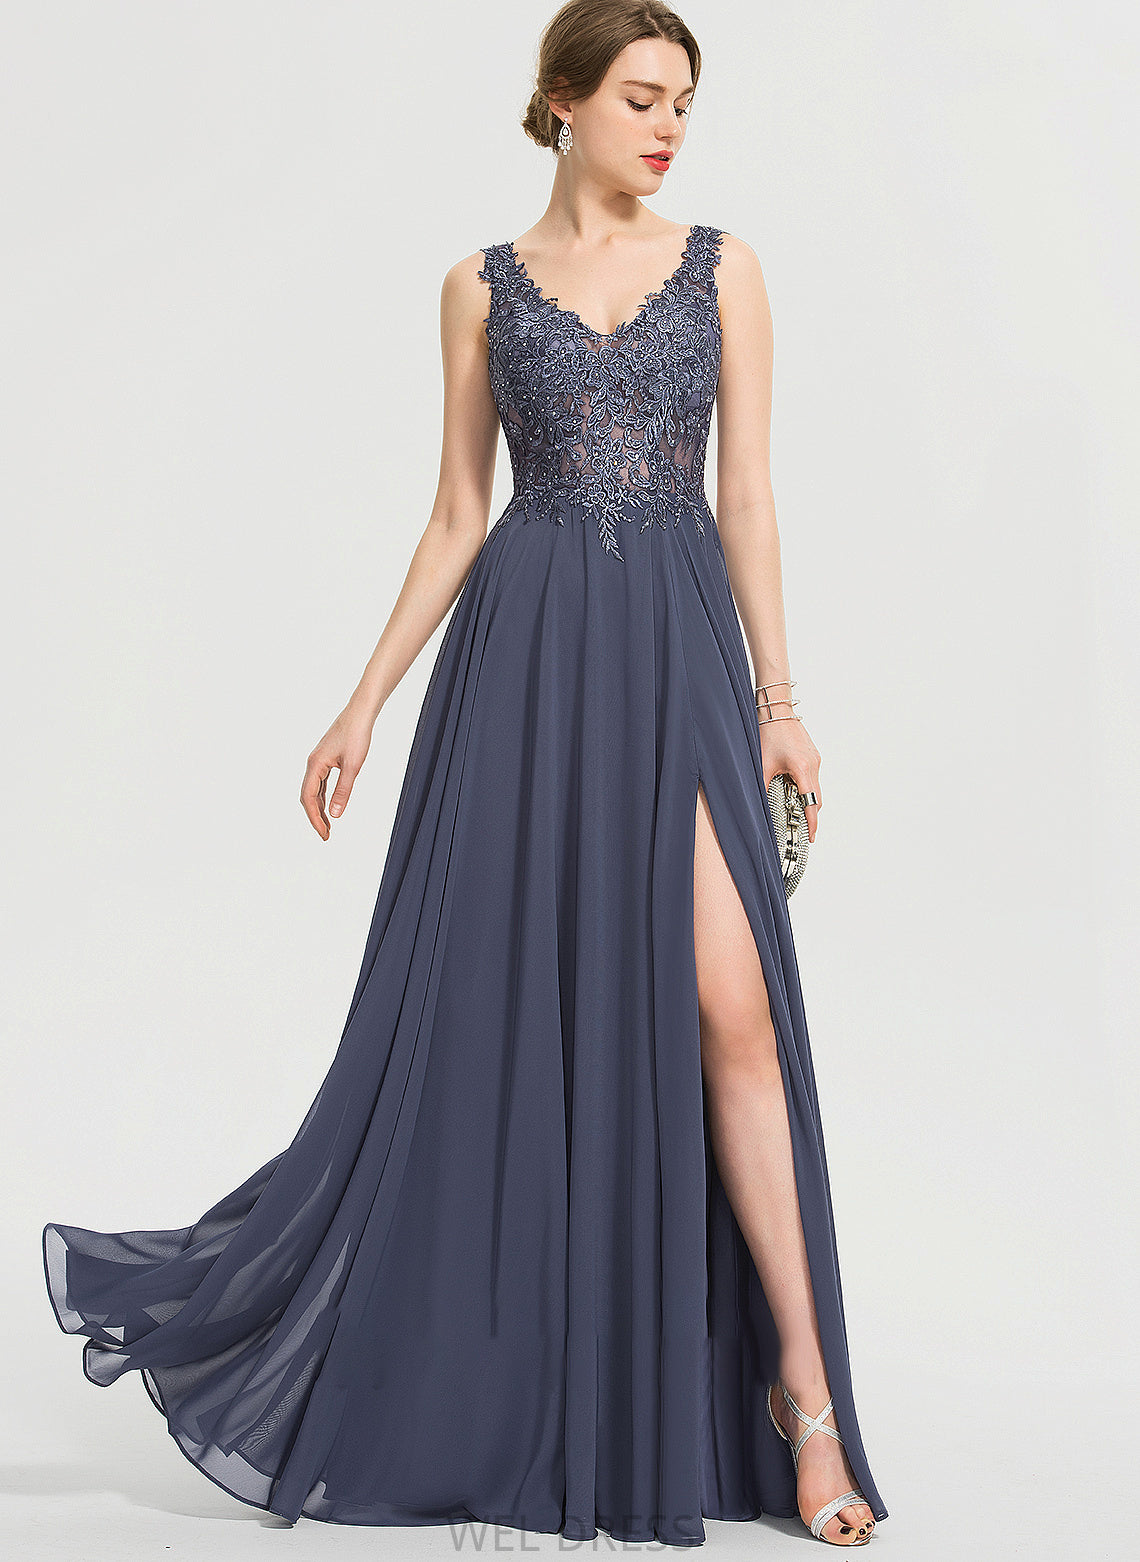 Front A-Line Prom Dresses Split With Sequins Chiffon Floor-Length Cali Beading V-neck